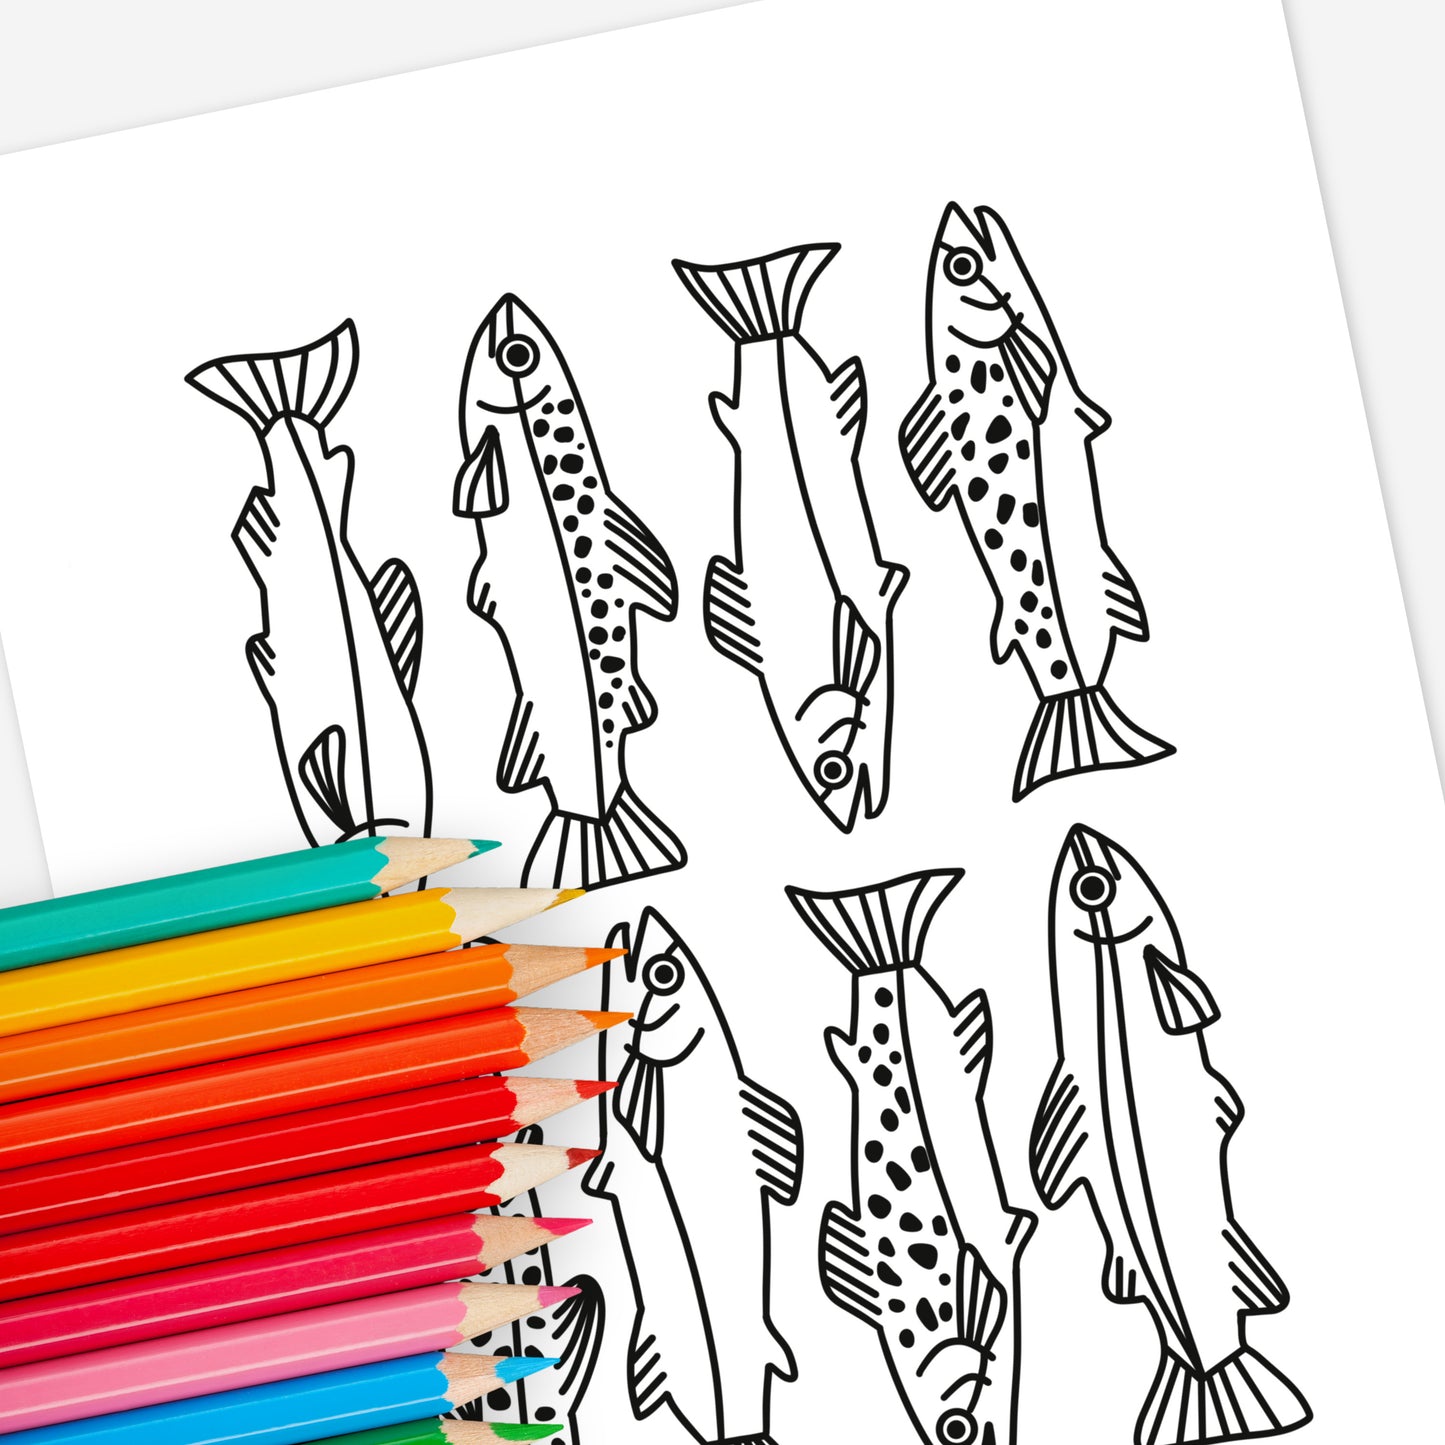 18 PK Fishing Coloring Pages Printed & Shipped | 3 Pages of Each 6 Pc Set | Lure Rainbow Trout Bass Water Fishing Gear Nature Sheets